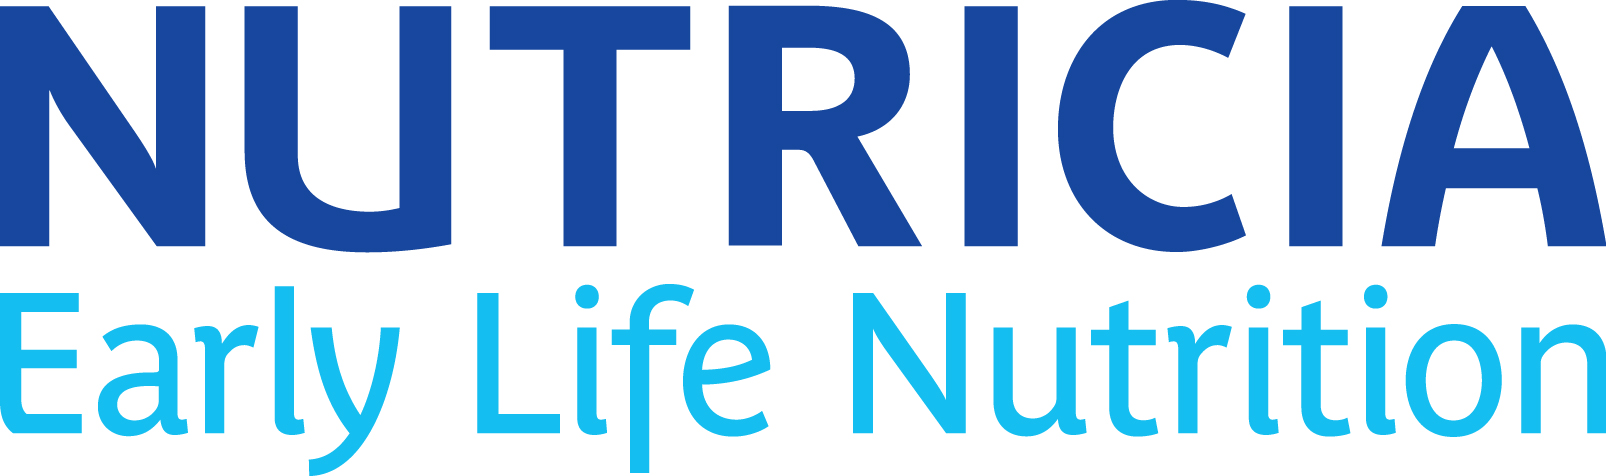 Nutricia Early Life Nutrition